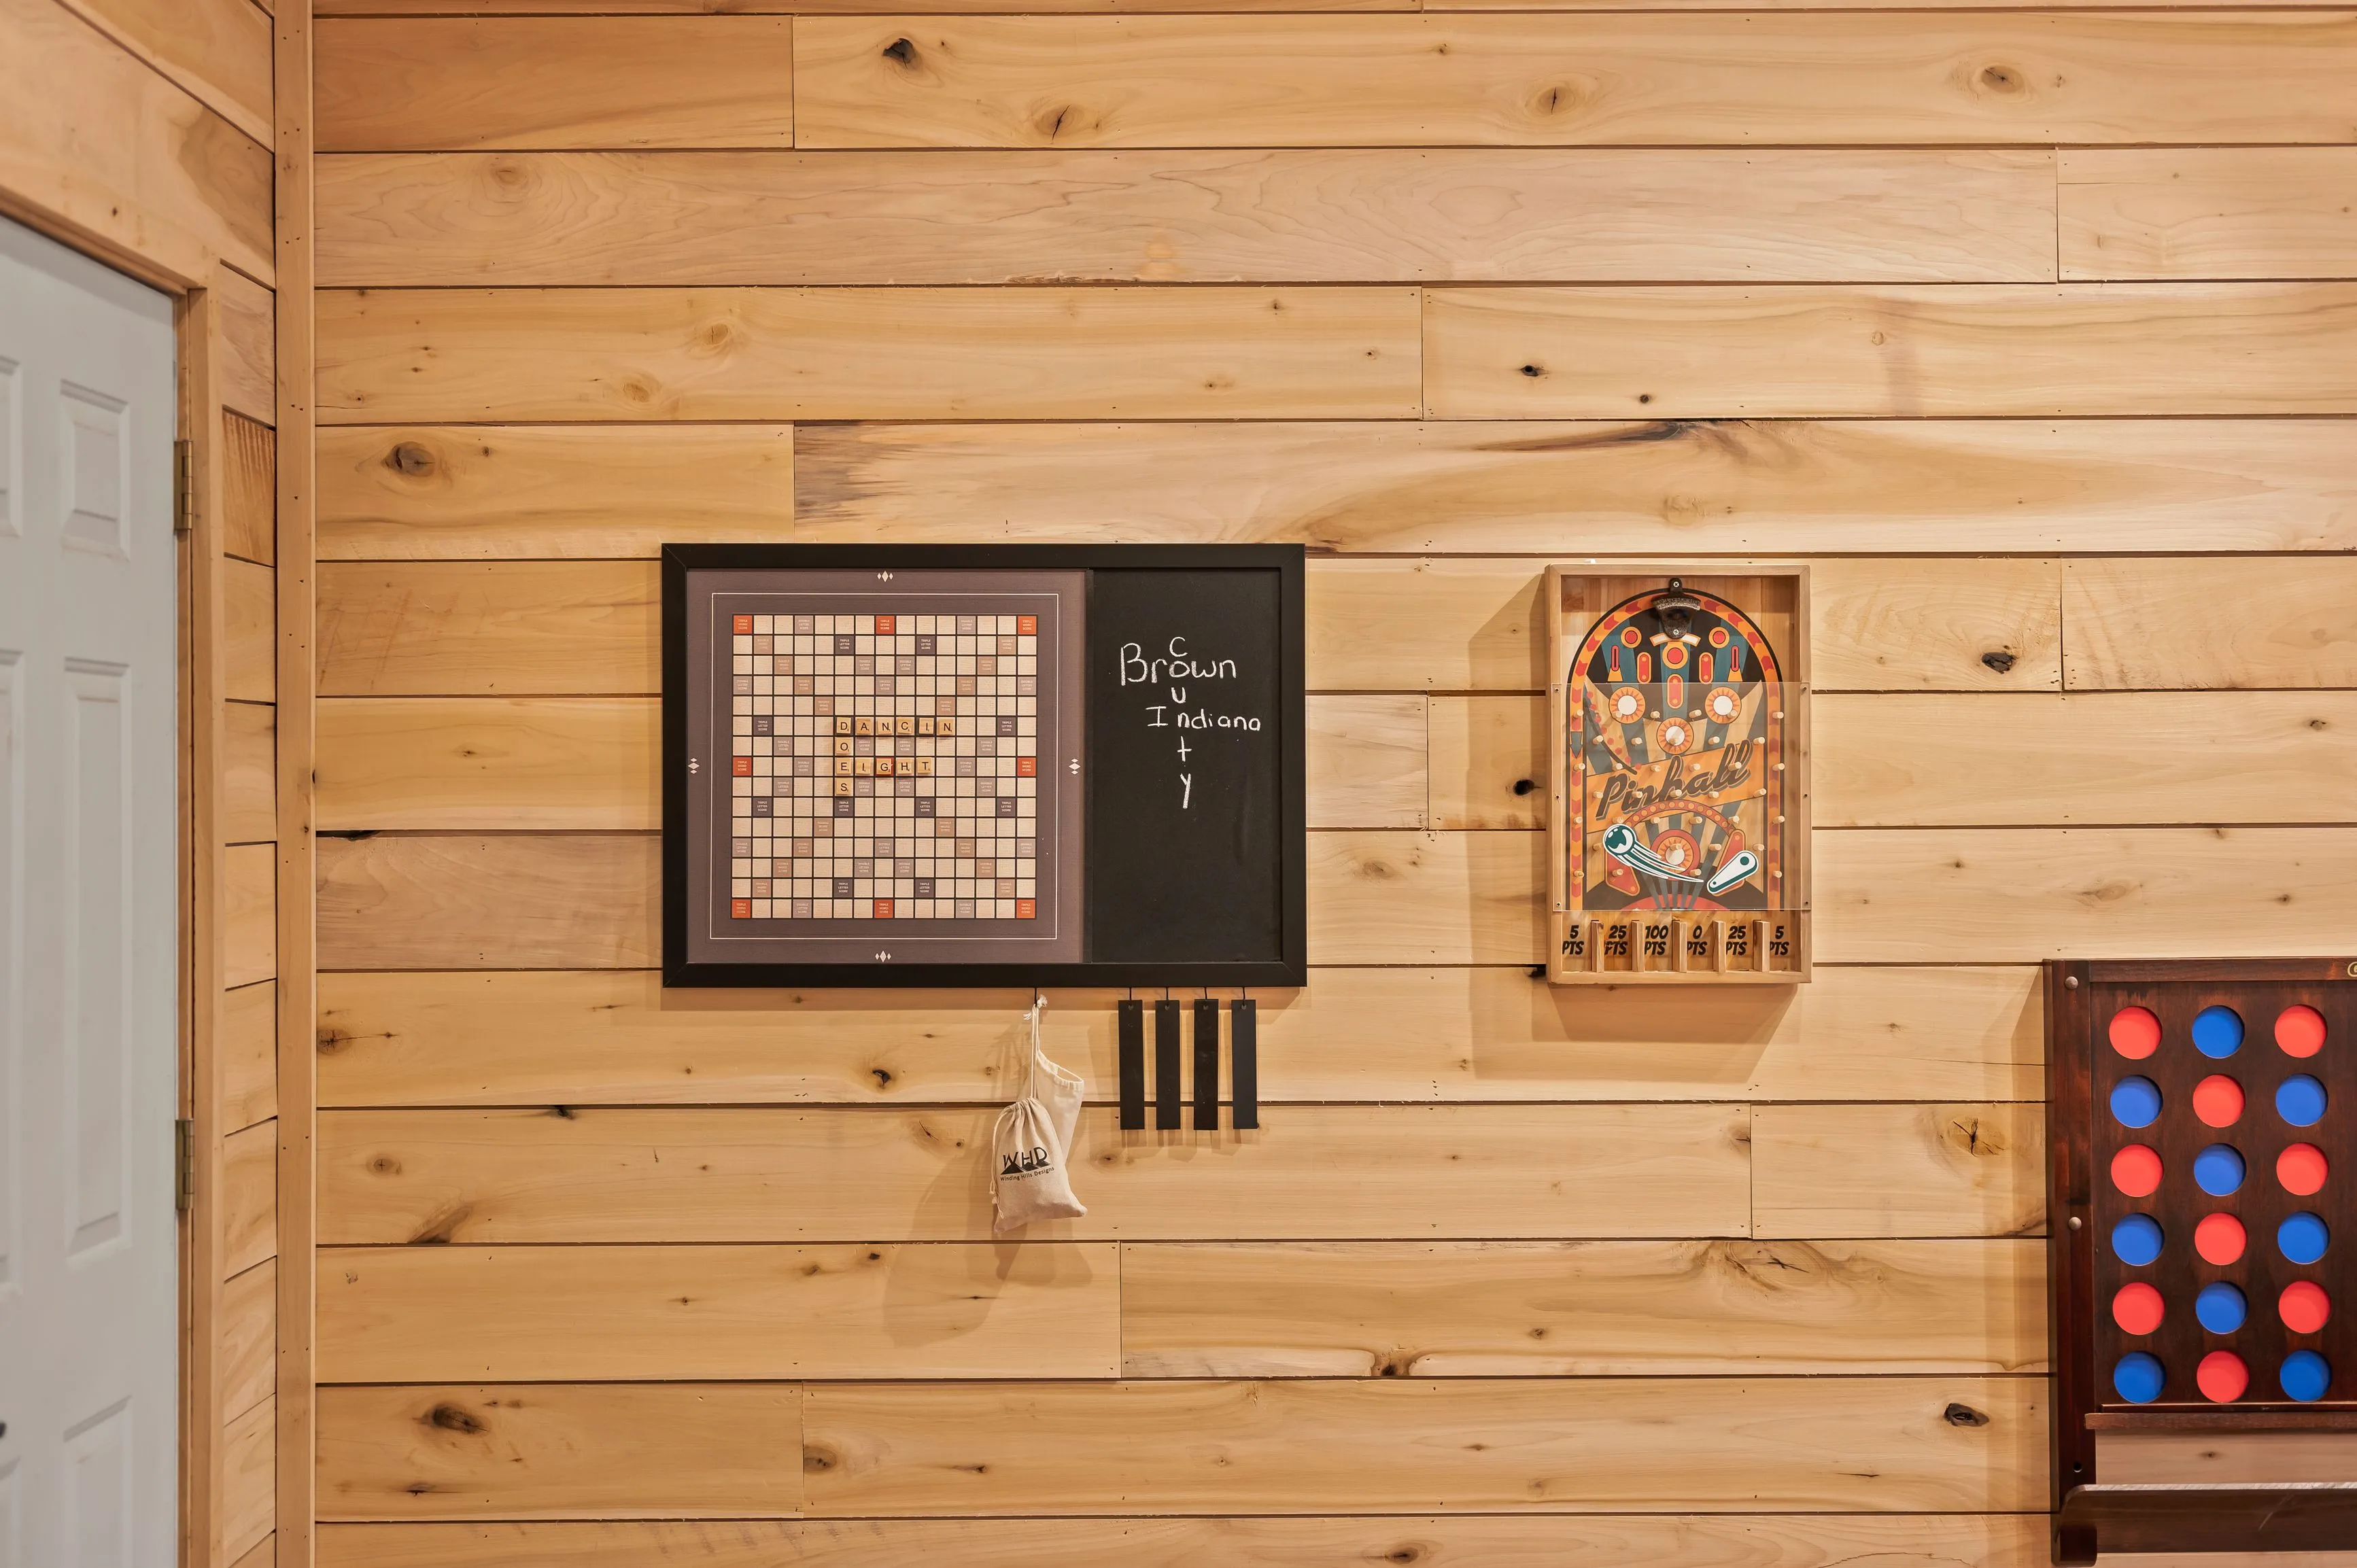 Wood-paneled room with a framed Scrabble board, a chalkboard with writing, a decorative pinball backglass, and a Connect Four game on the wall.